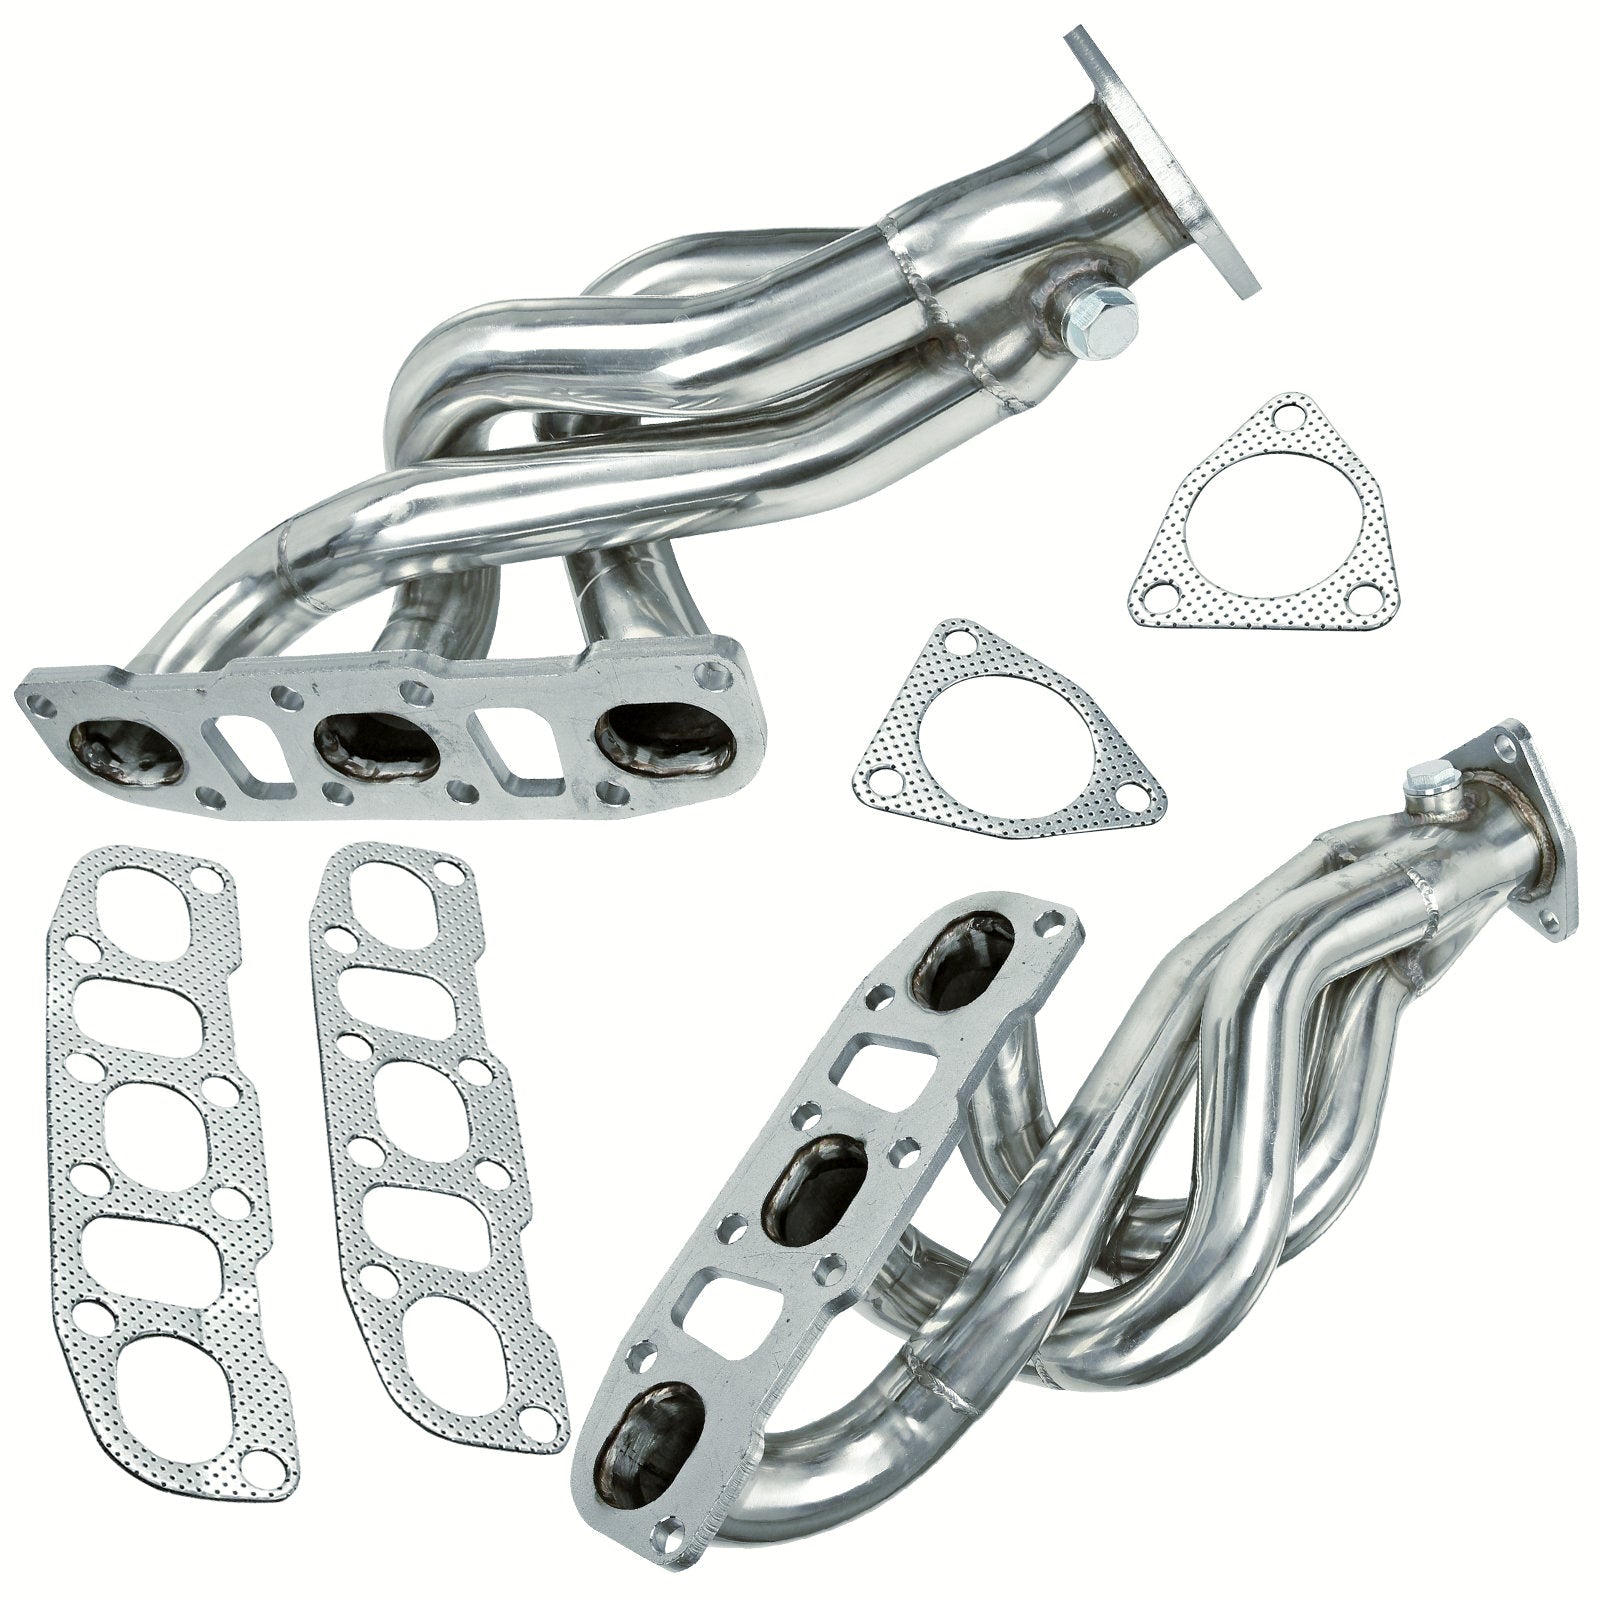 Stainless Steel Exhaust Manifold Headers for 2003-2007 Nissan 350Z/G35 Infiniti